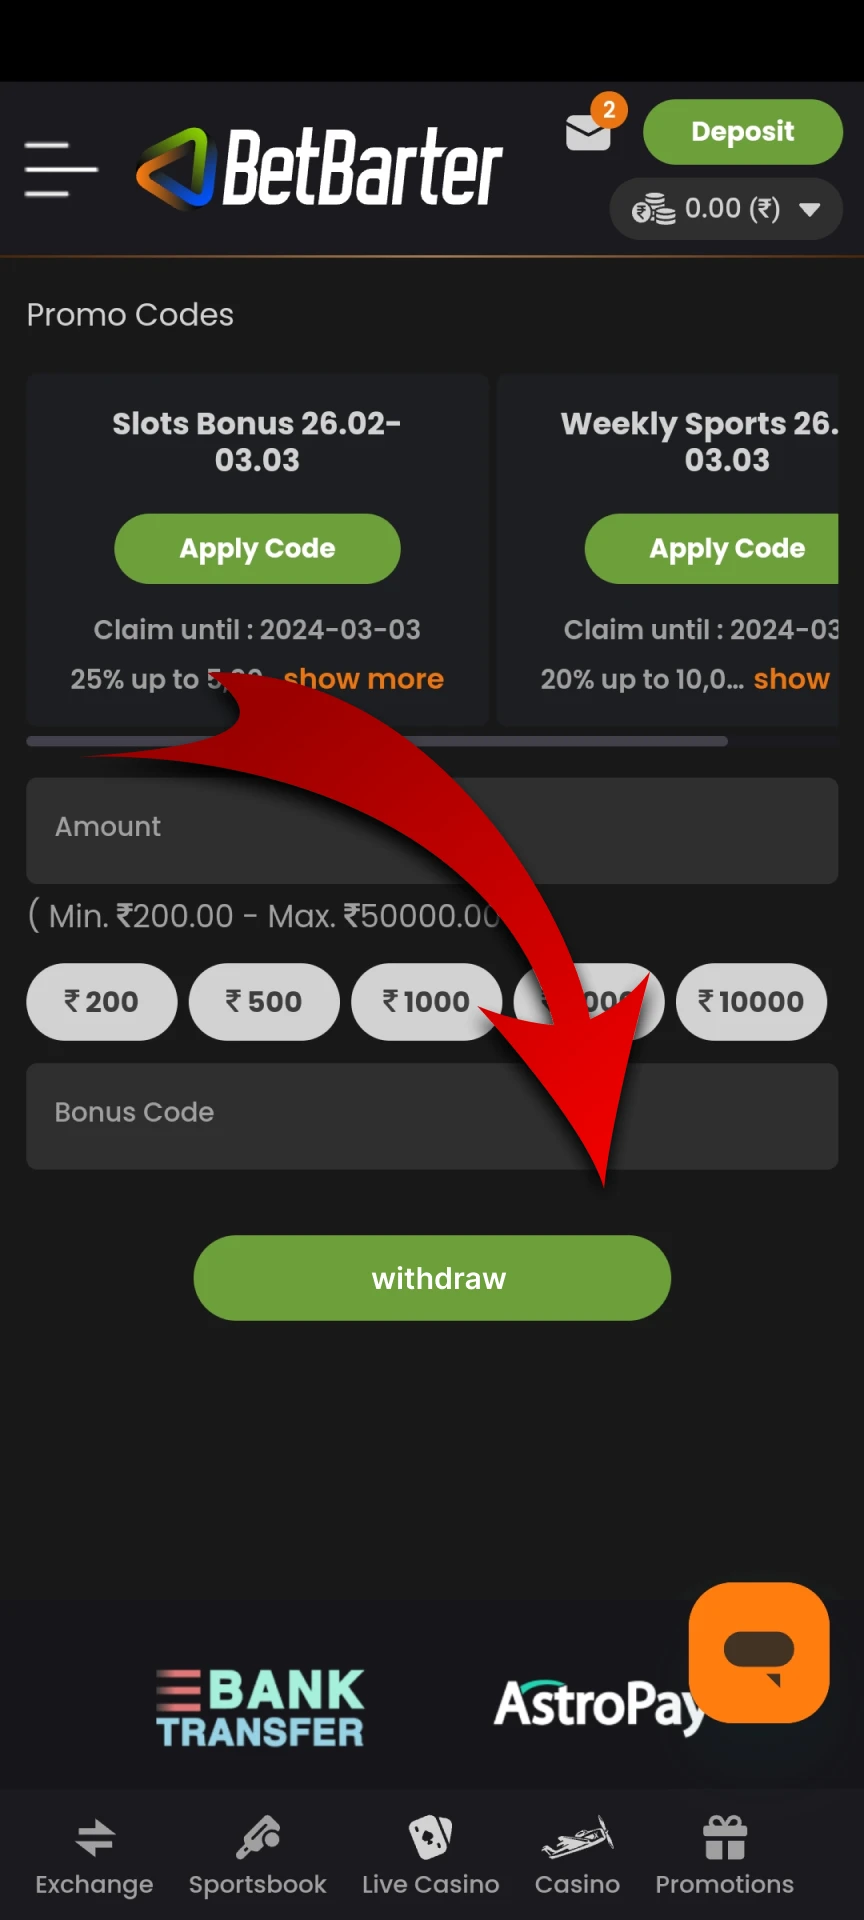 Complete your withdrawal to BetBarter.